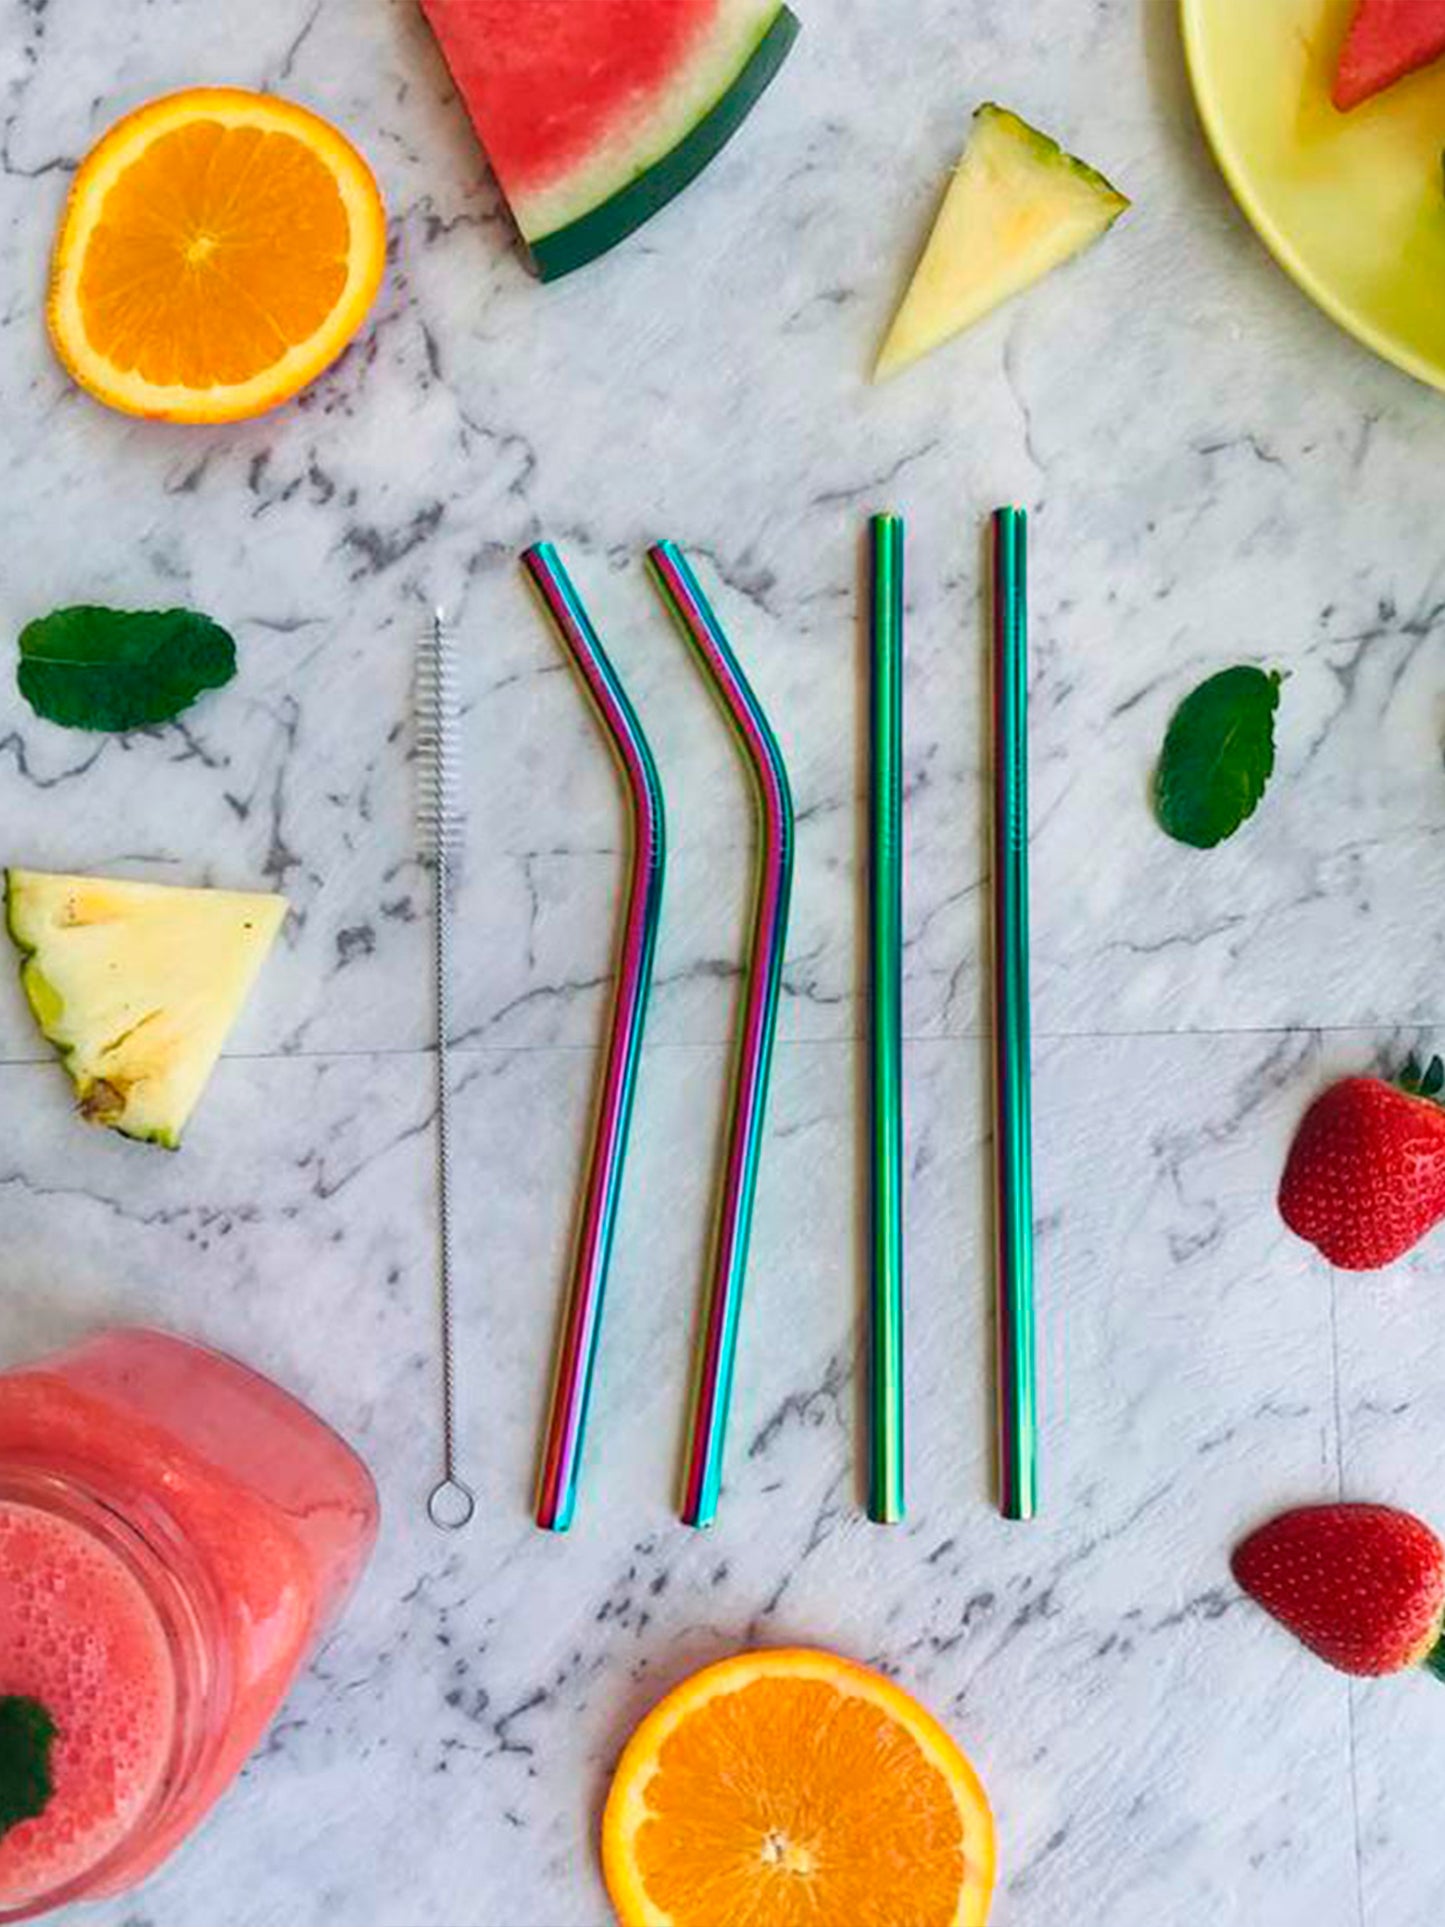 PACK OF STAINLESS STEEL STRAWS